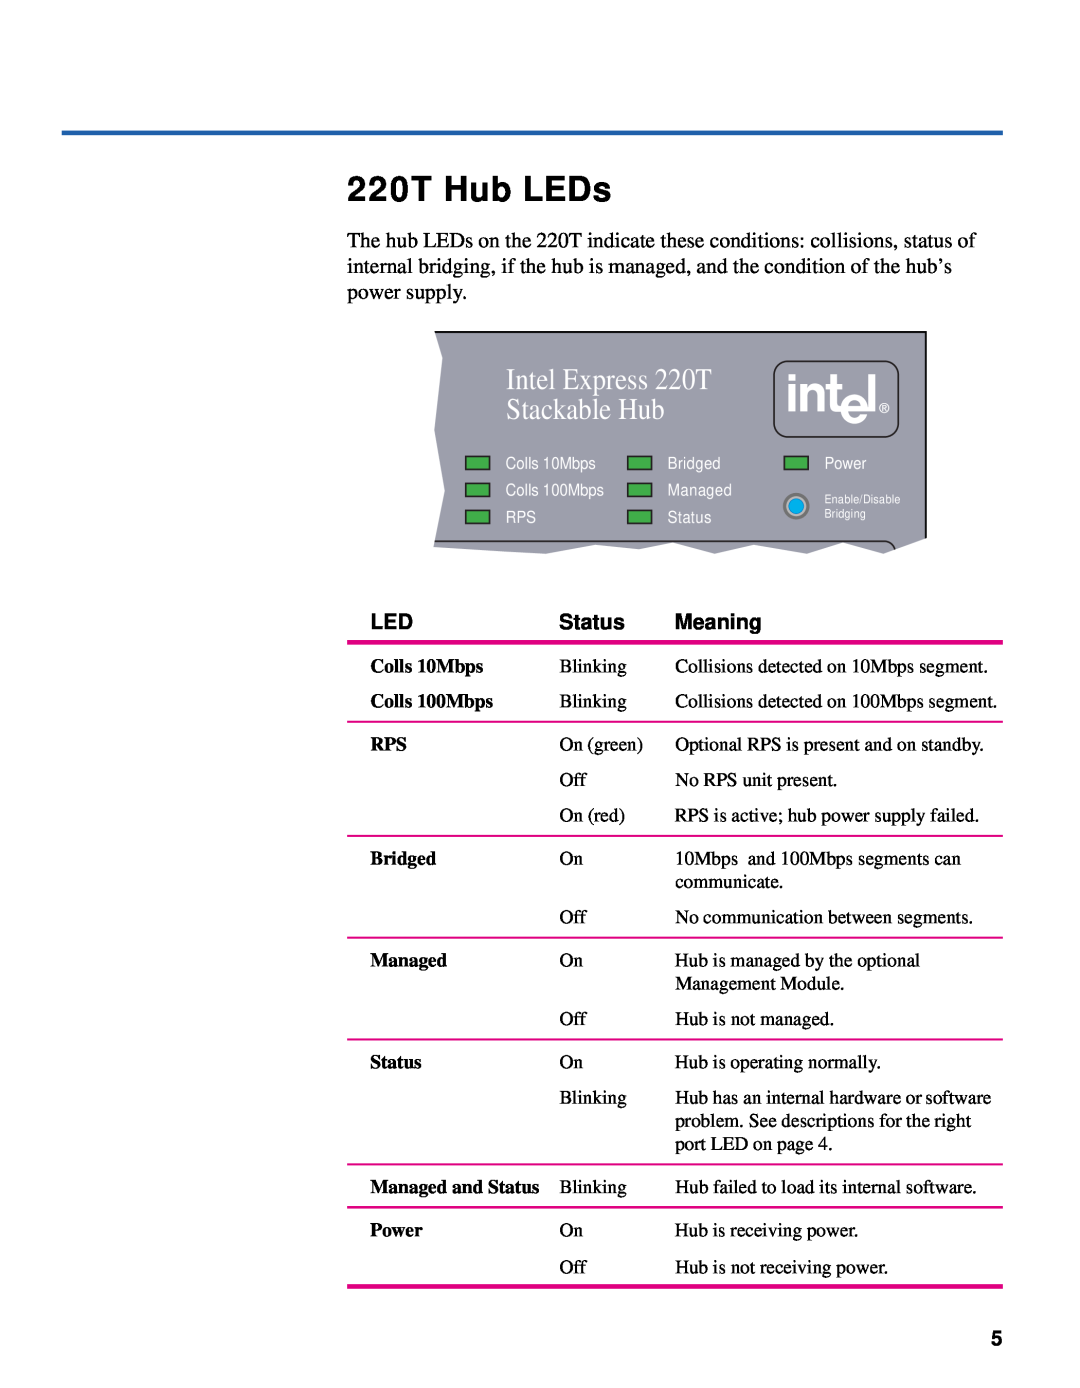 Intel 210T 220T Hub LEDs, Intel Express 220T, Stackable Hub, Status, Meaning, Colls 10Mbps, Colls 100Mbps, Bridged, Power 